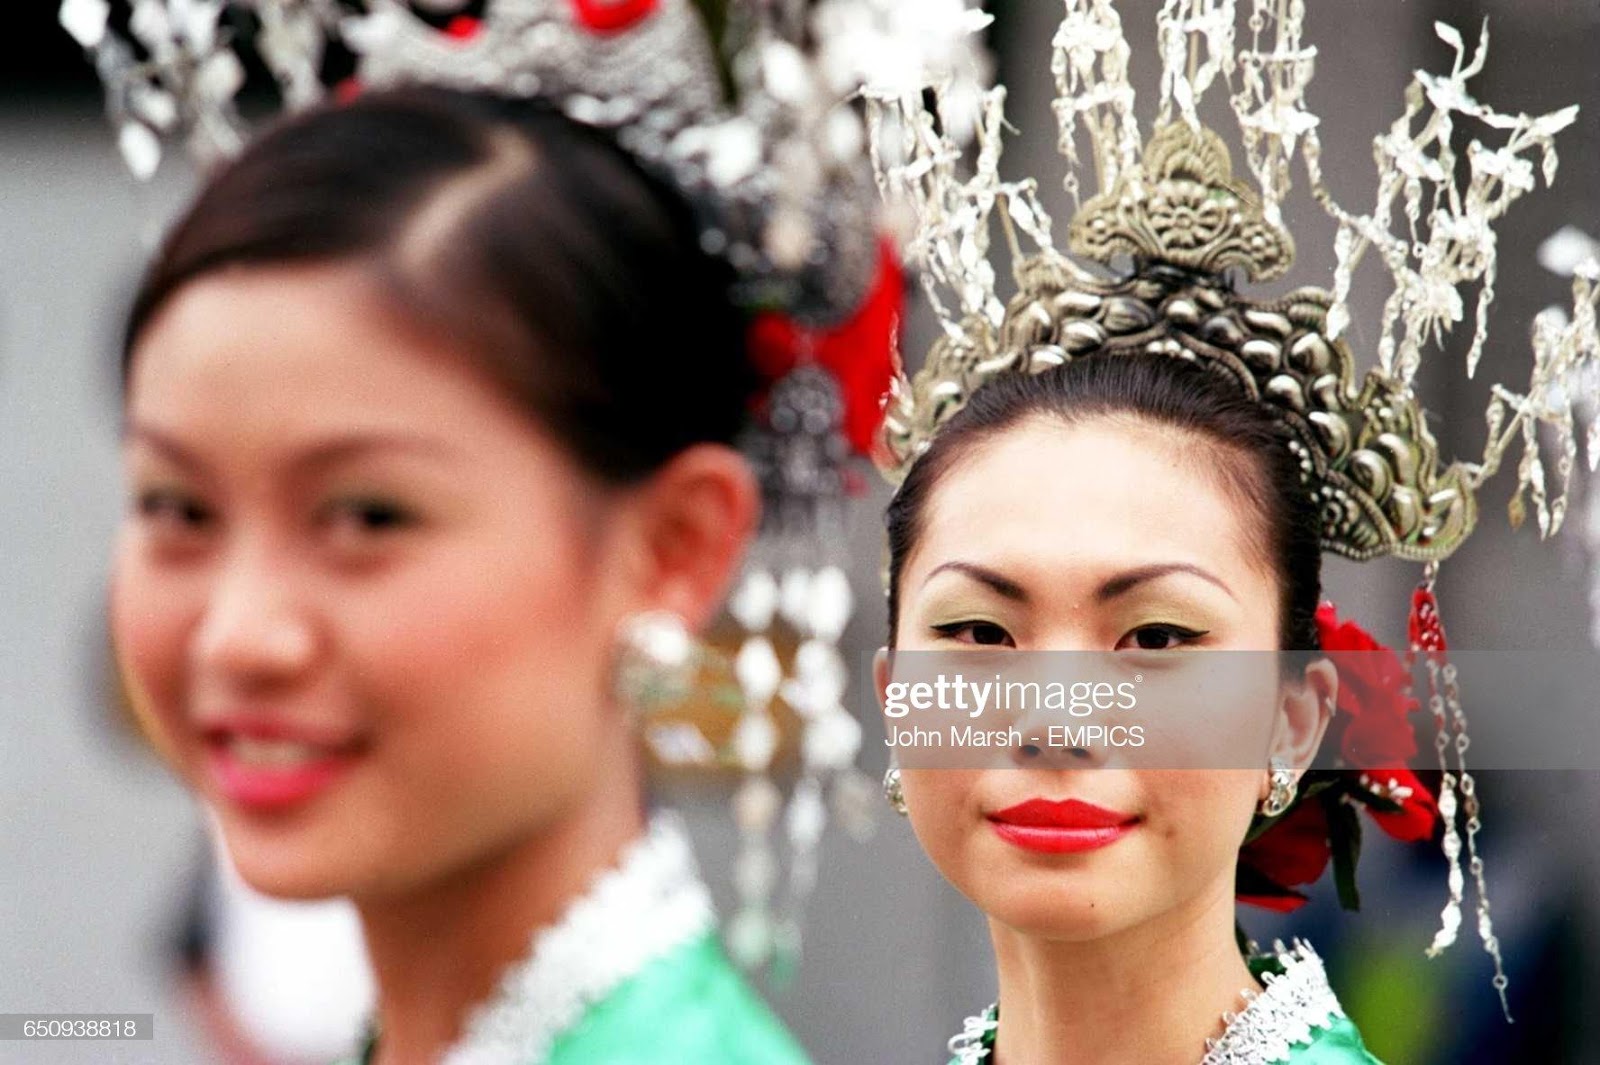 D:\Documenti\posts\posts\Women and motorsport\foto\Getty e altre\Kuala Lumpur\malaysian-girls-in-traditional-costume-on-the-grid-before-the-race-picture-id650938818.jpg